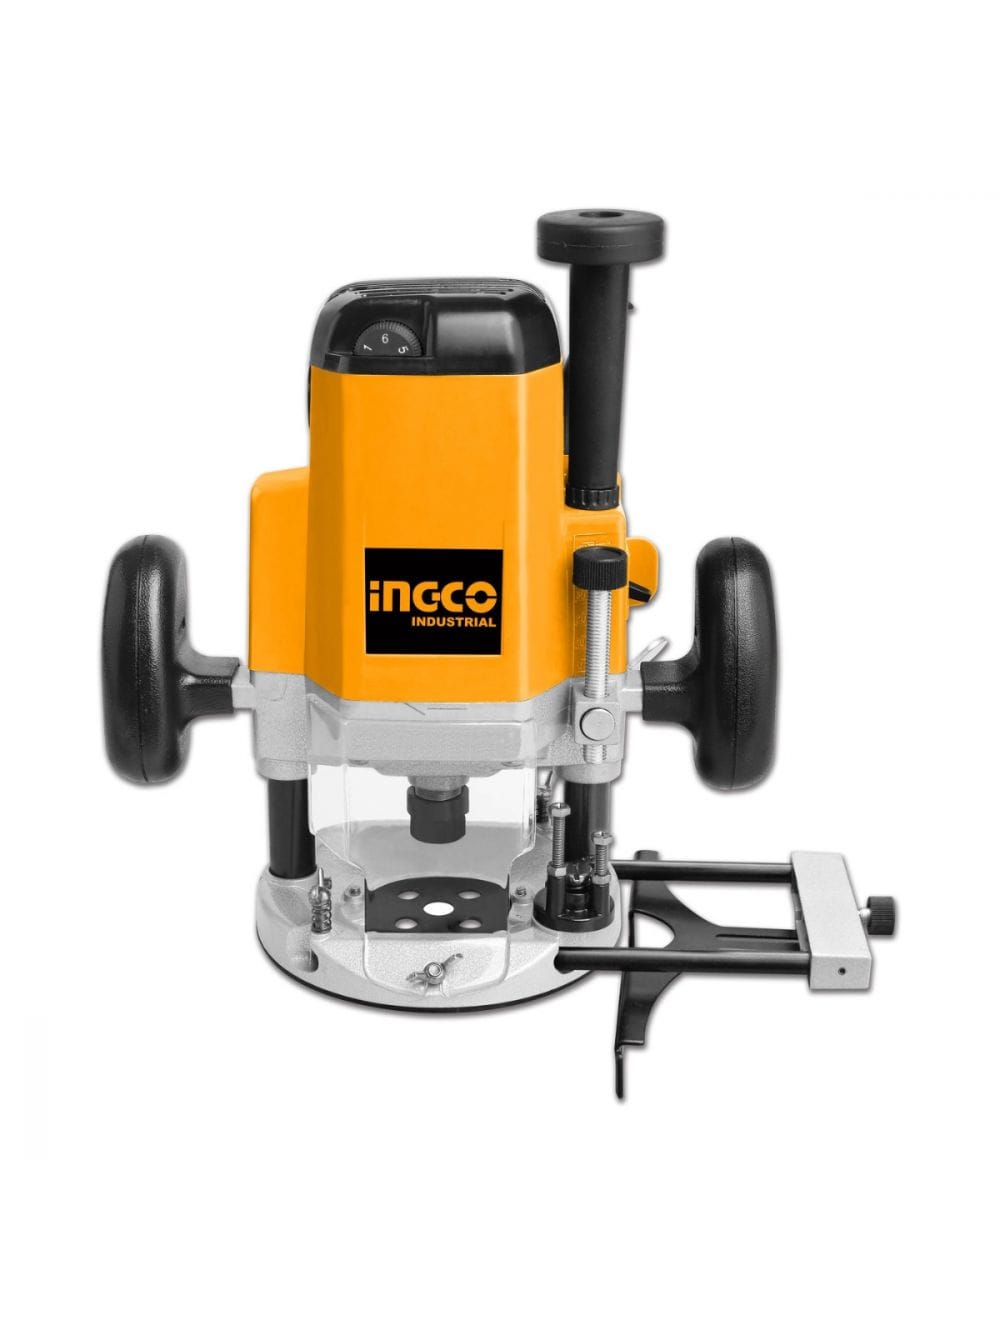 Ingco Electric Router 2200W - RT22008 | Supply Master | Accra, Ghana Tools Building Steel Engineering Hardware tool